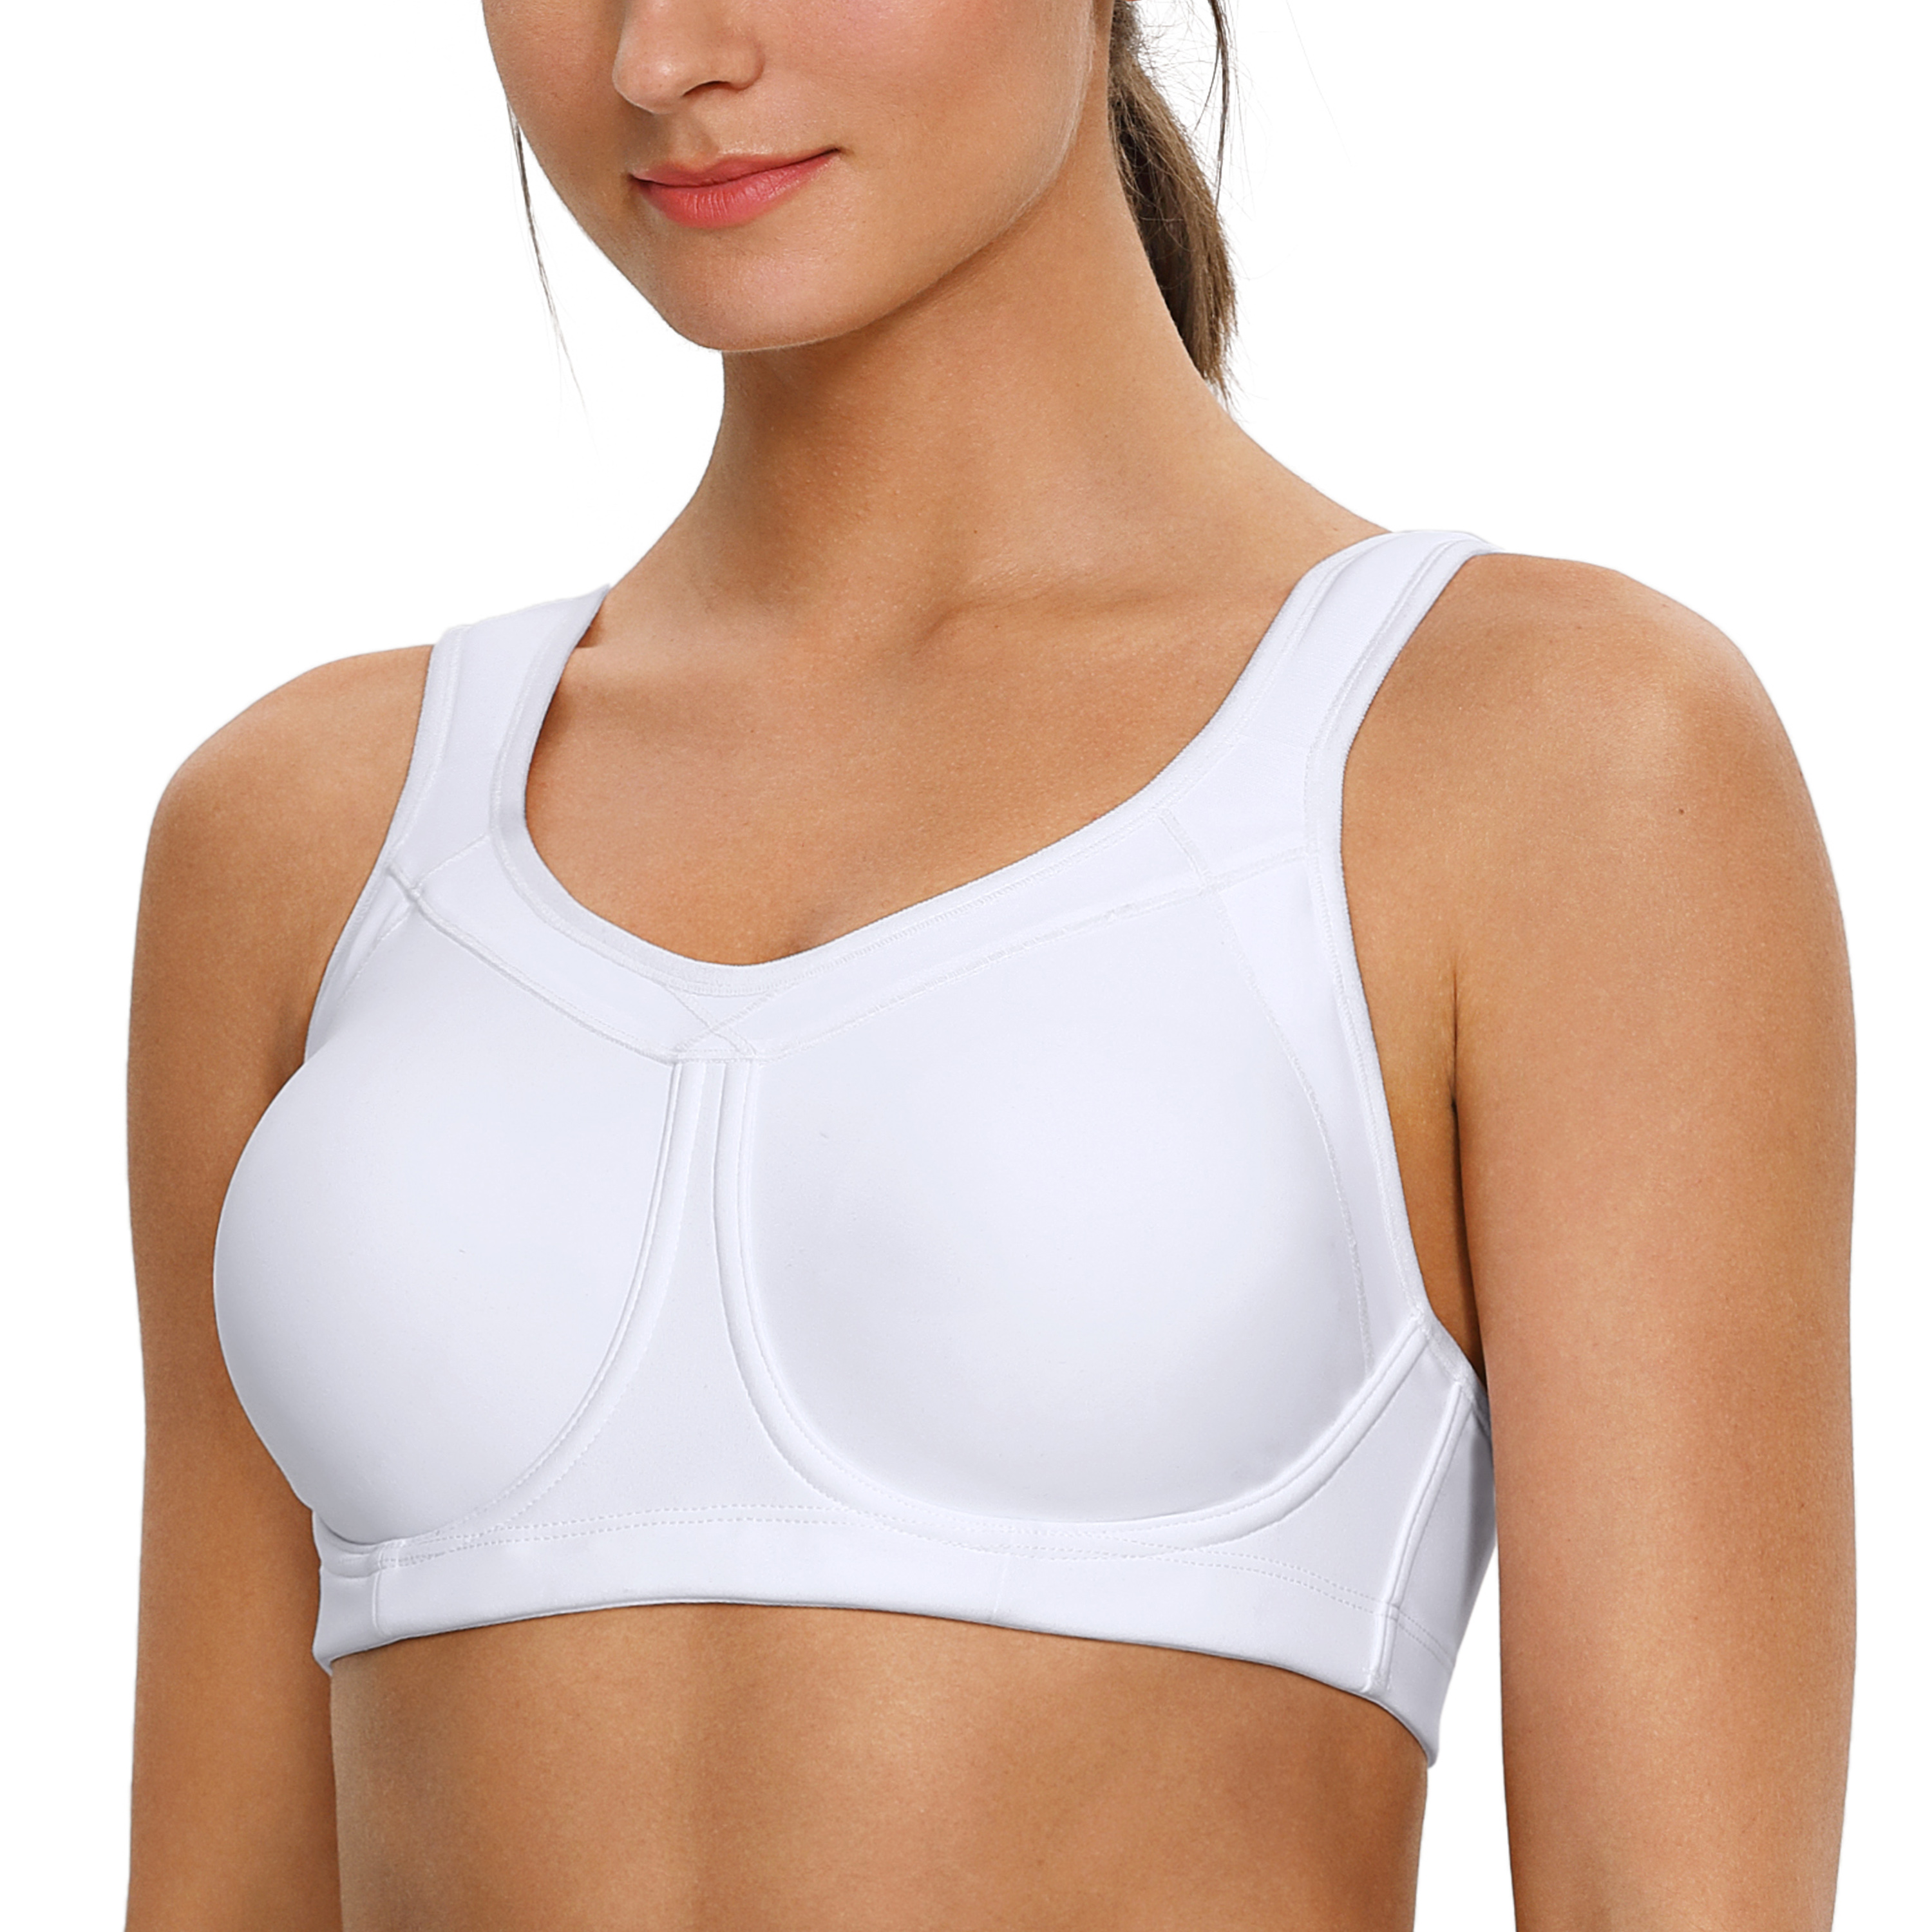 SYROKAN High Impact Sports Bras for Women Support India